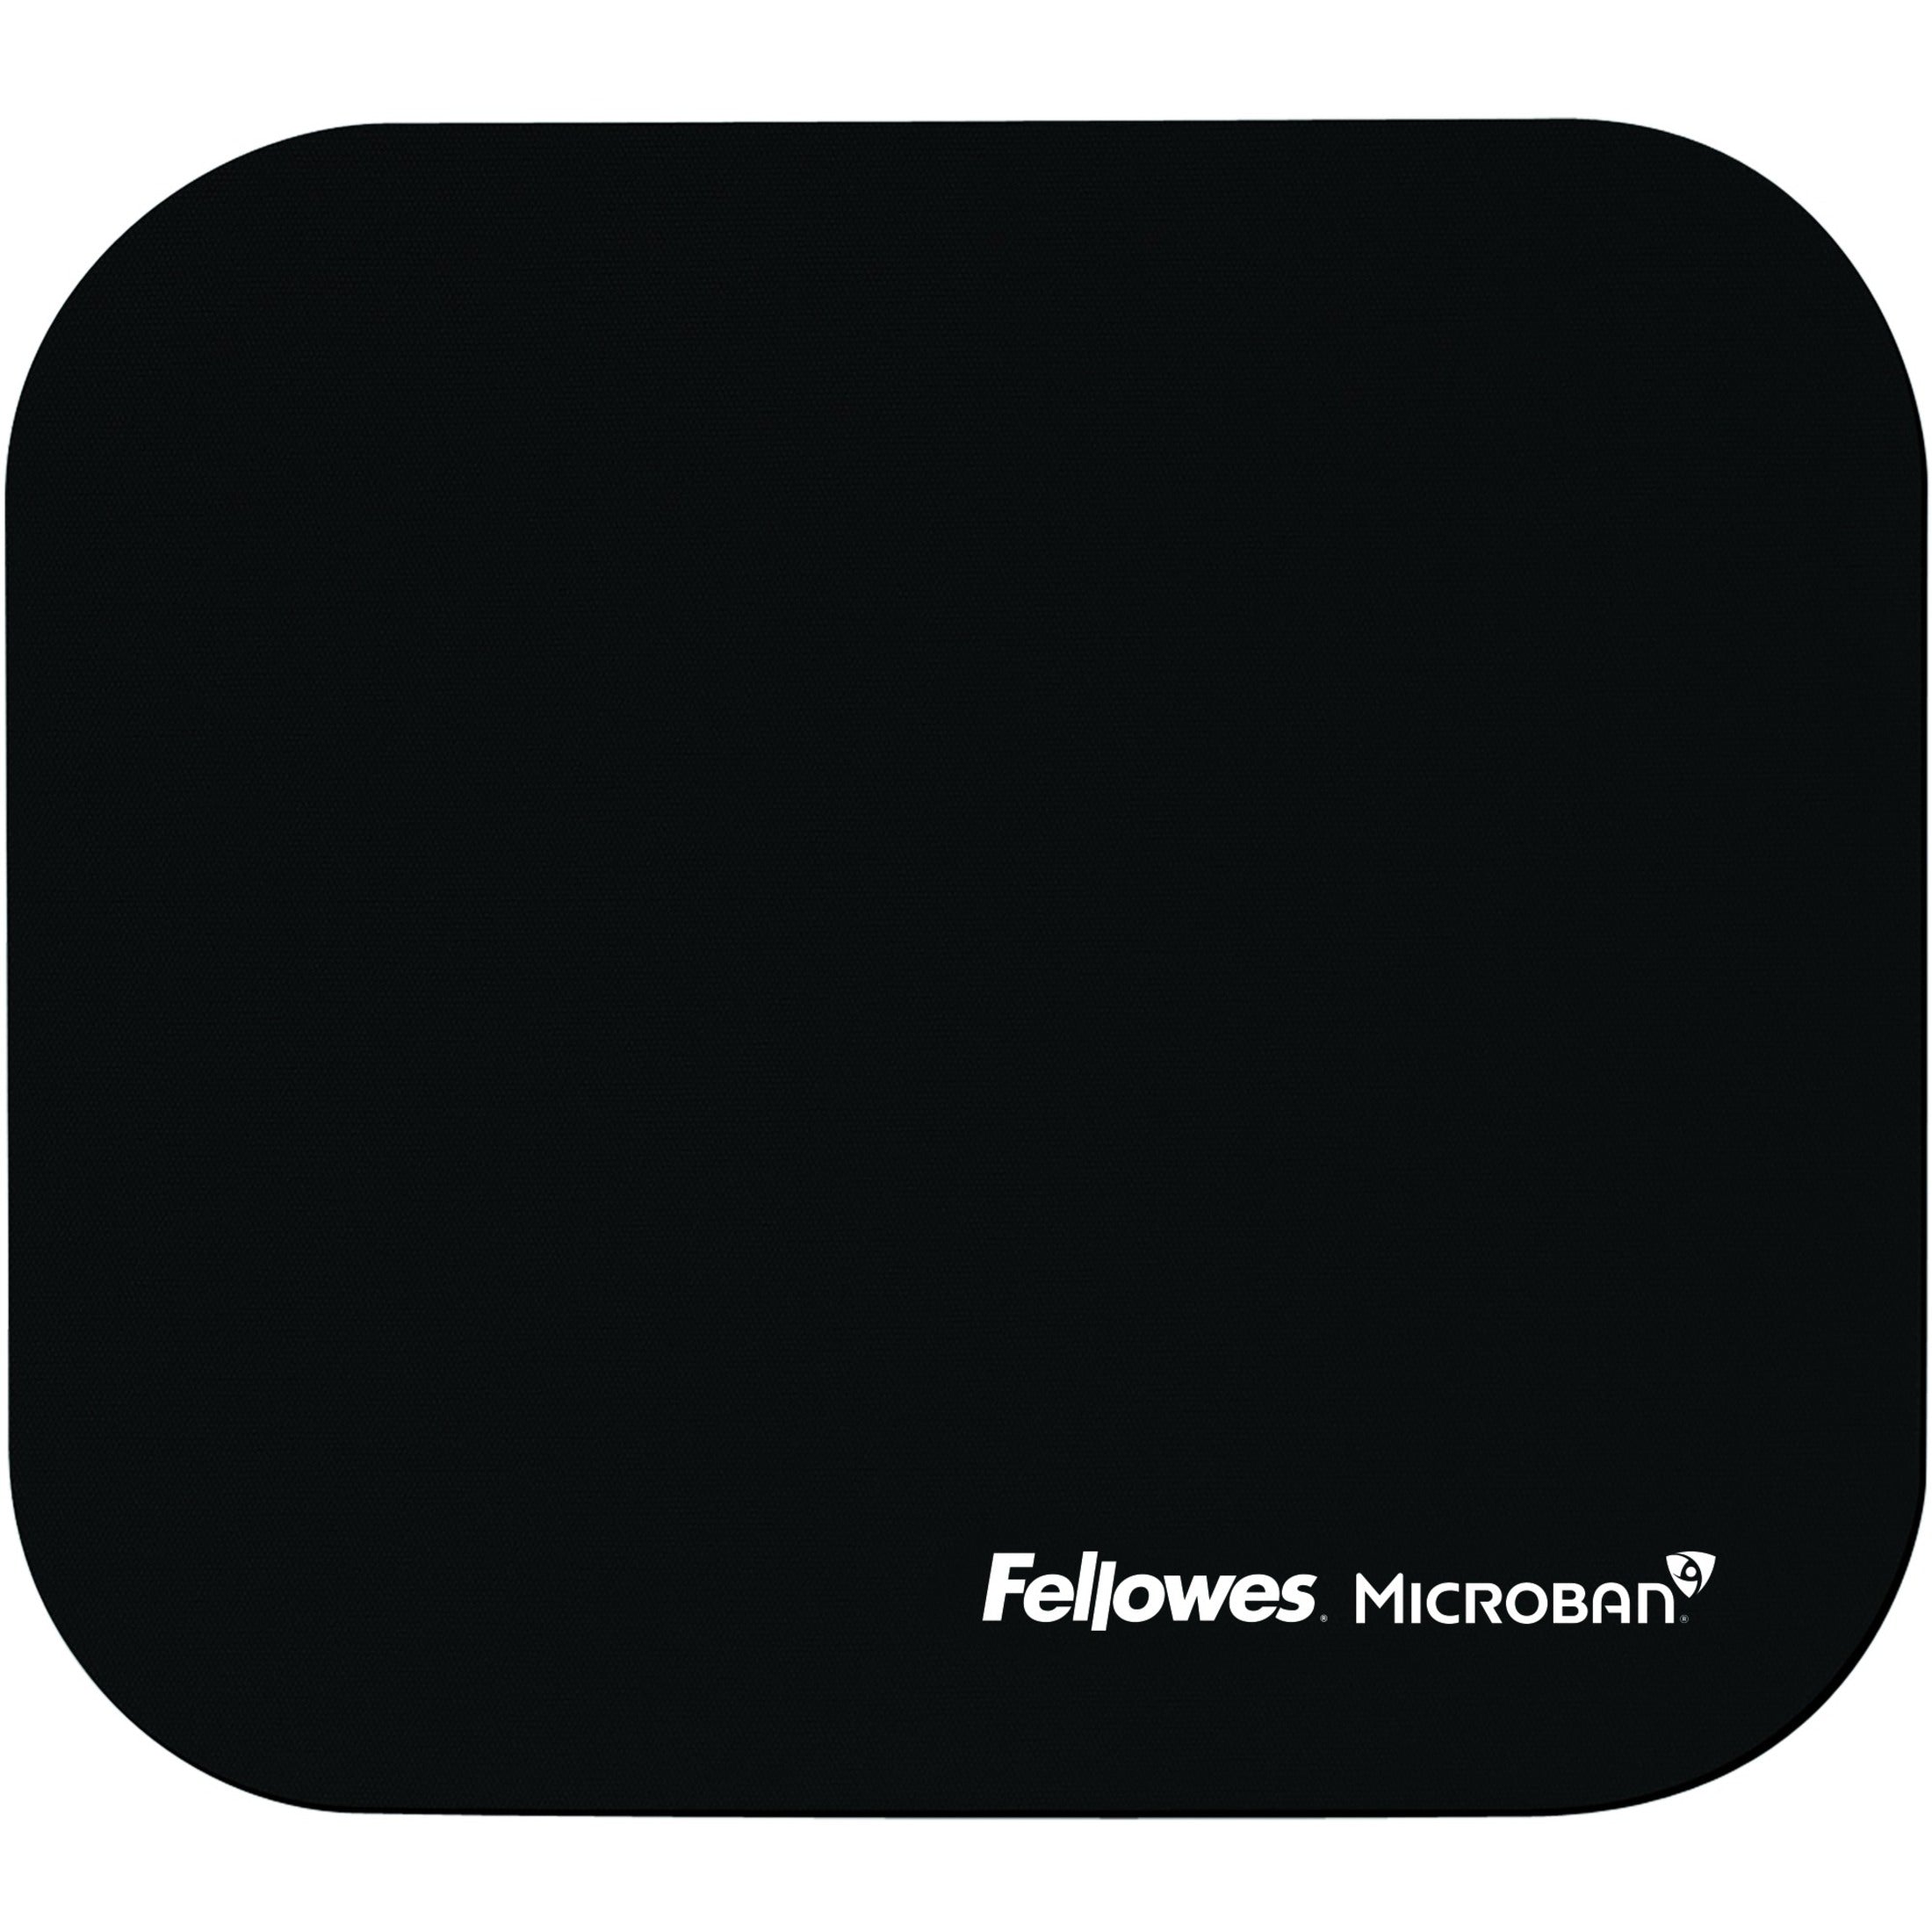 Fellowes 5933901 Microban Mouse Pad, Nonskid, Black, 9x8x1/8